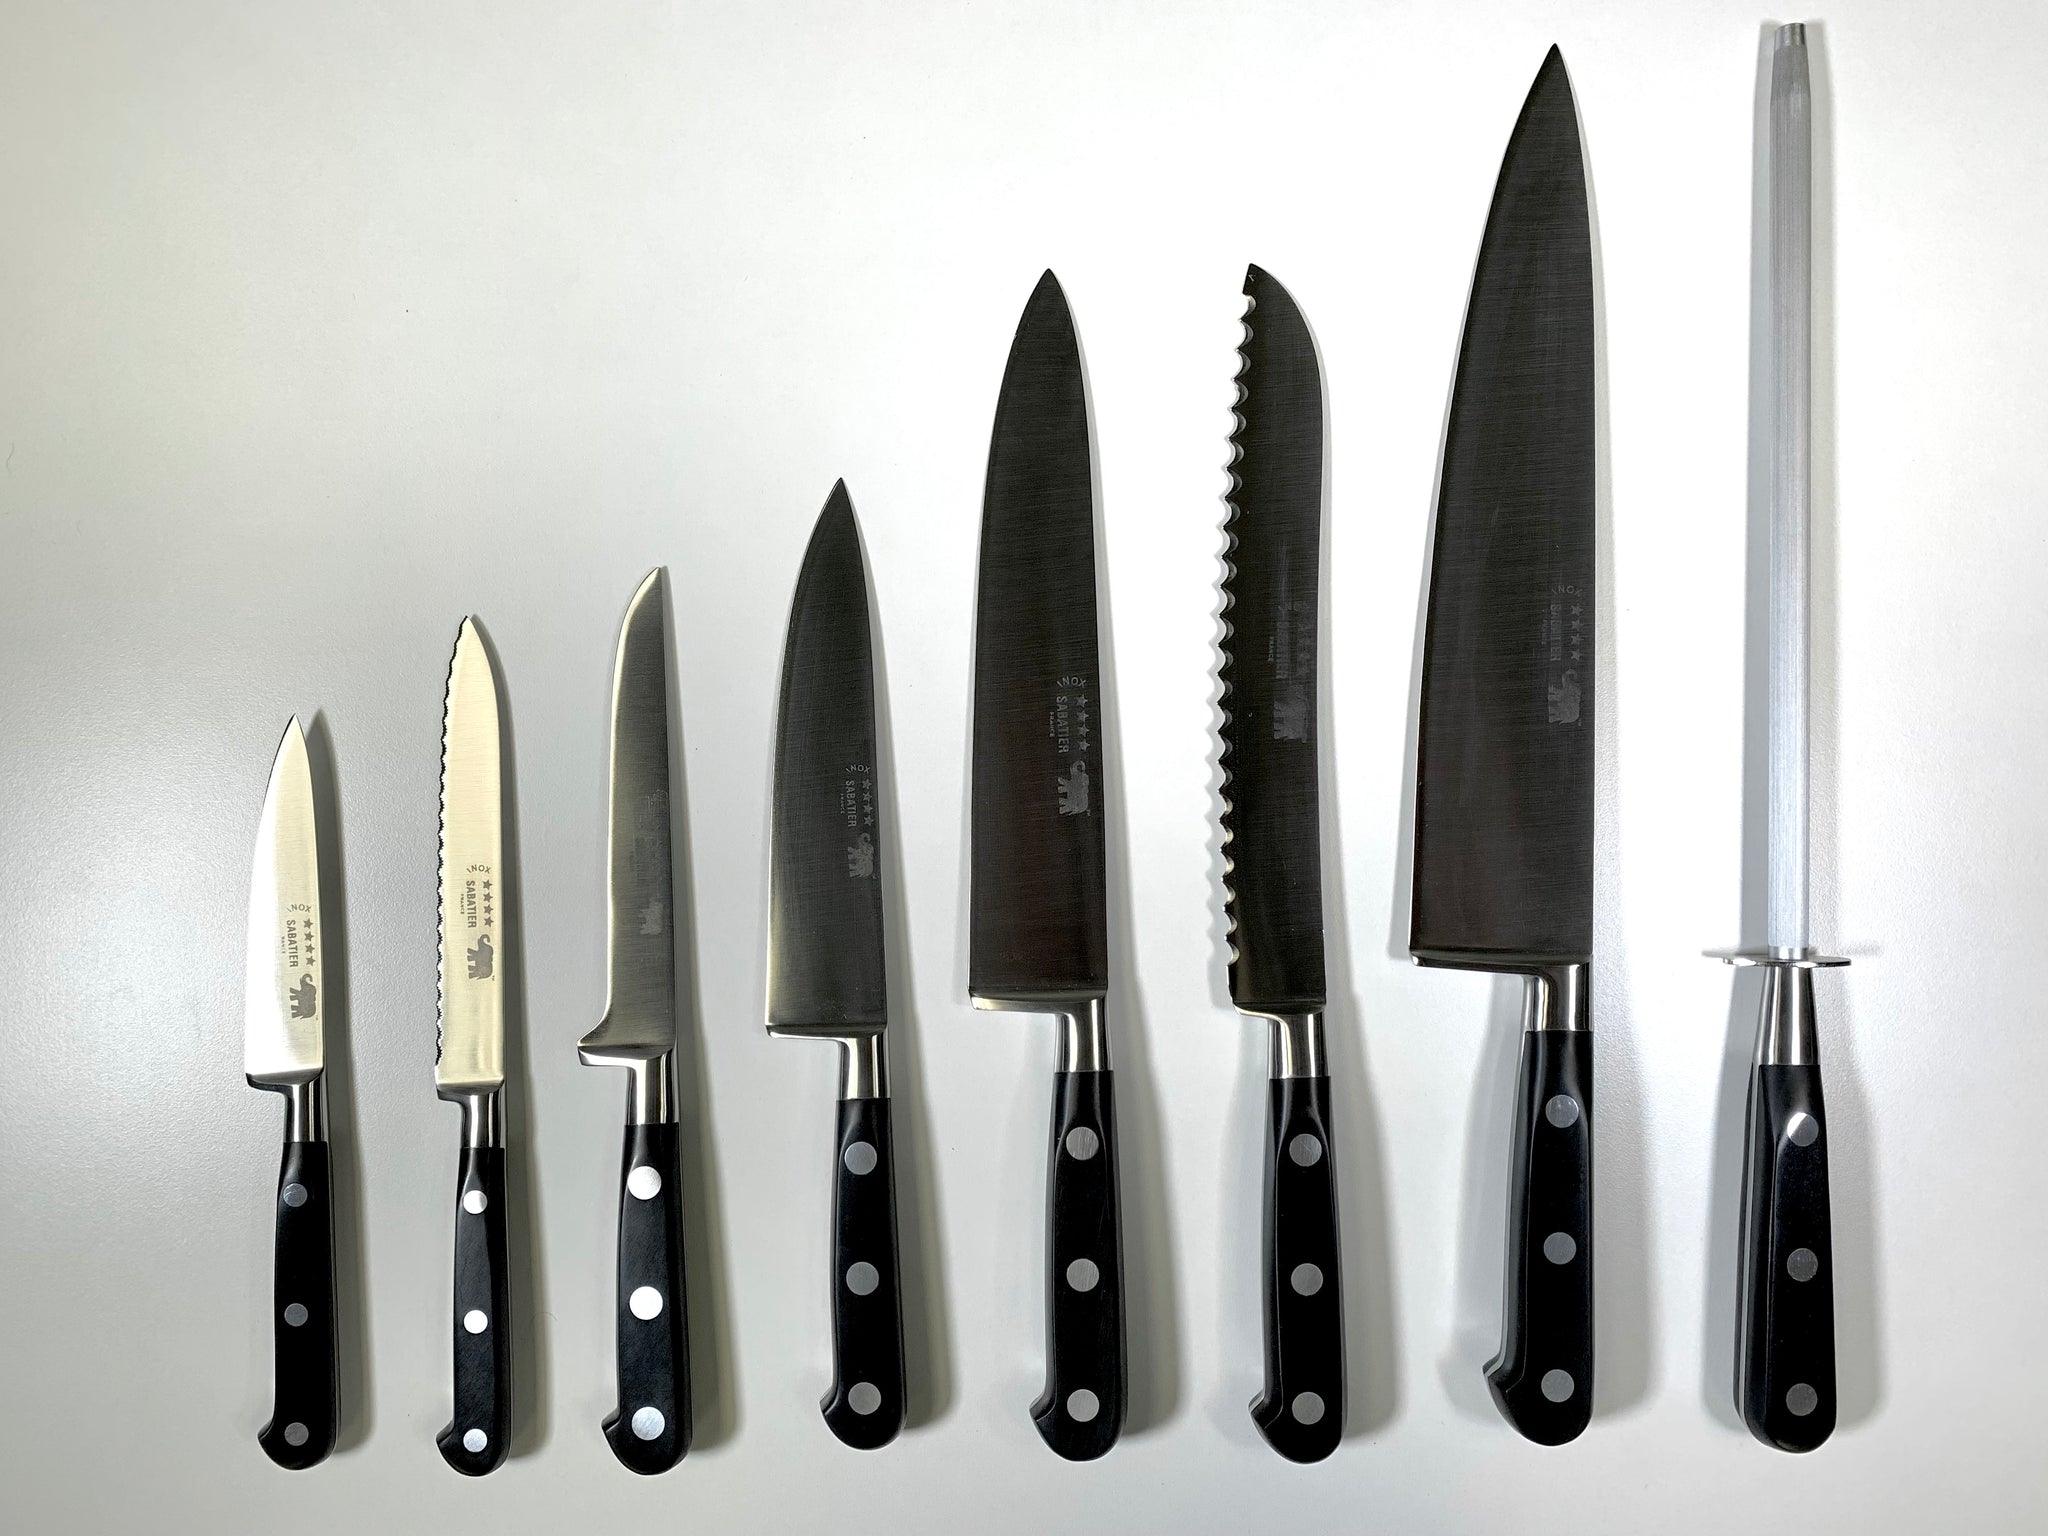 8 pc Deluxe Kitchen Knives Set - Stainless Steel – Sabatier Knife Shop